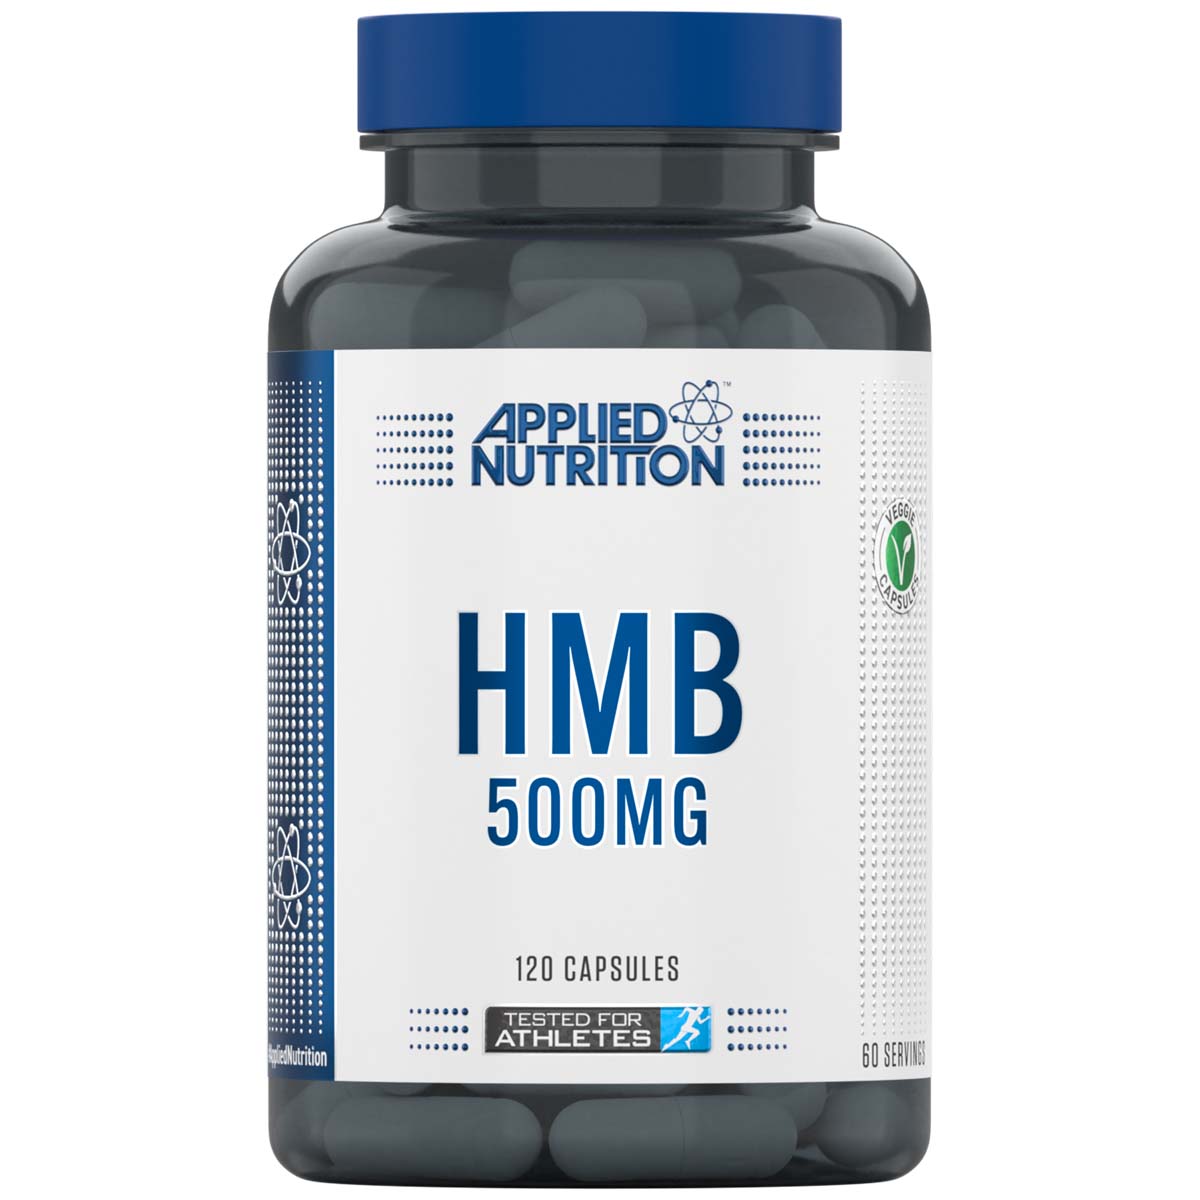 Applied Nutrition HMB, 500 mg, 120 Capsules